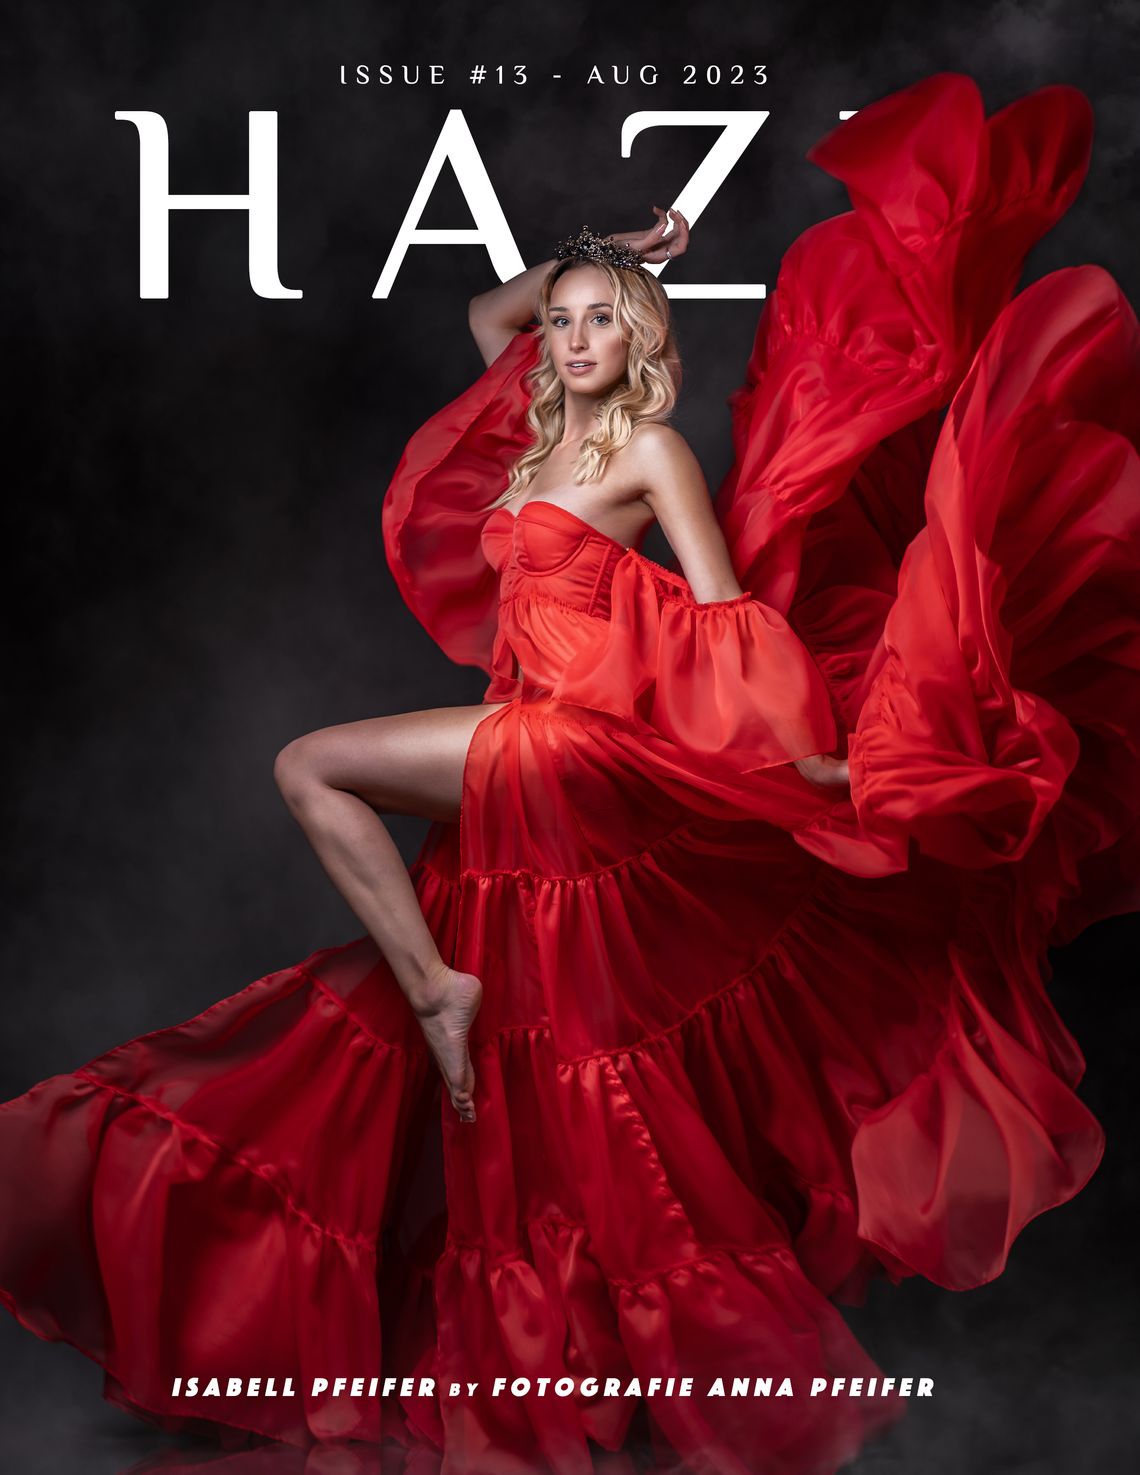 HAZL Magazine Issue #13 -  August 2023 Launched Worldwide